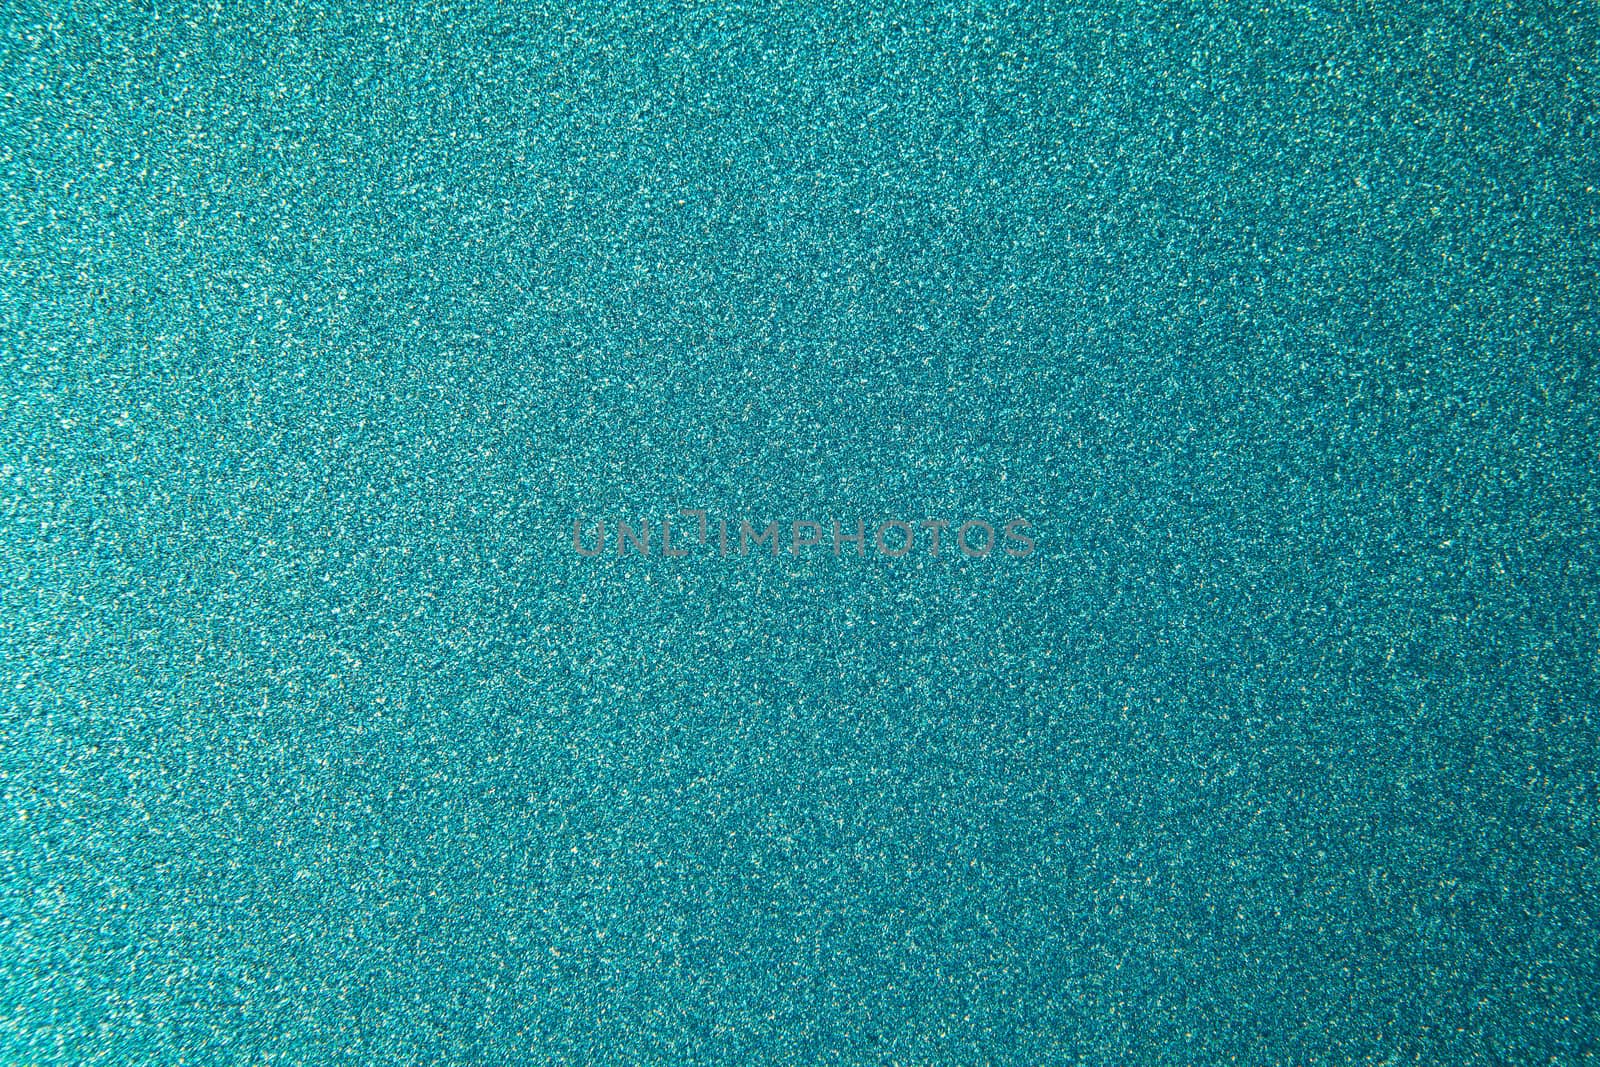 Metallic glitter green-blue aquamarine wrapping paper backgrond, by ALLUNEED